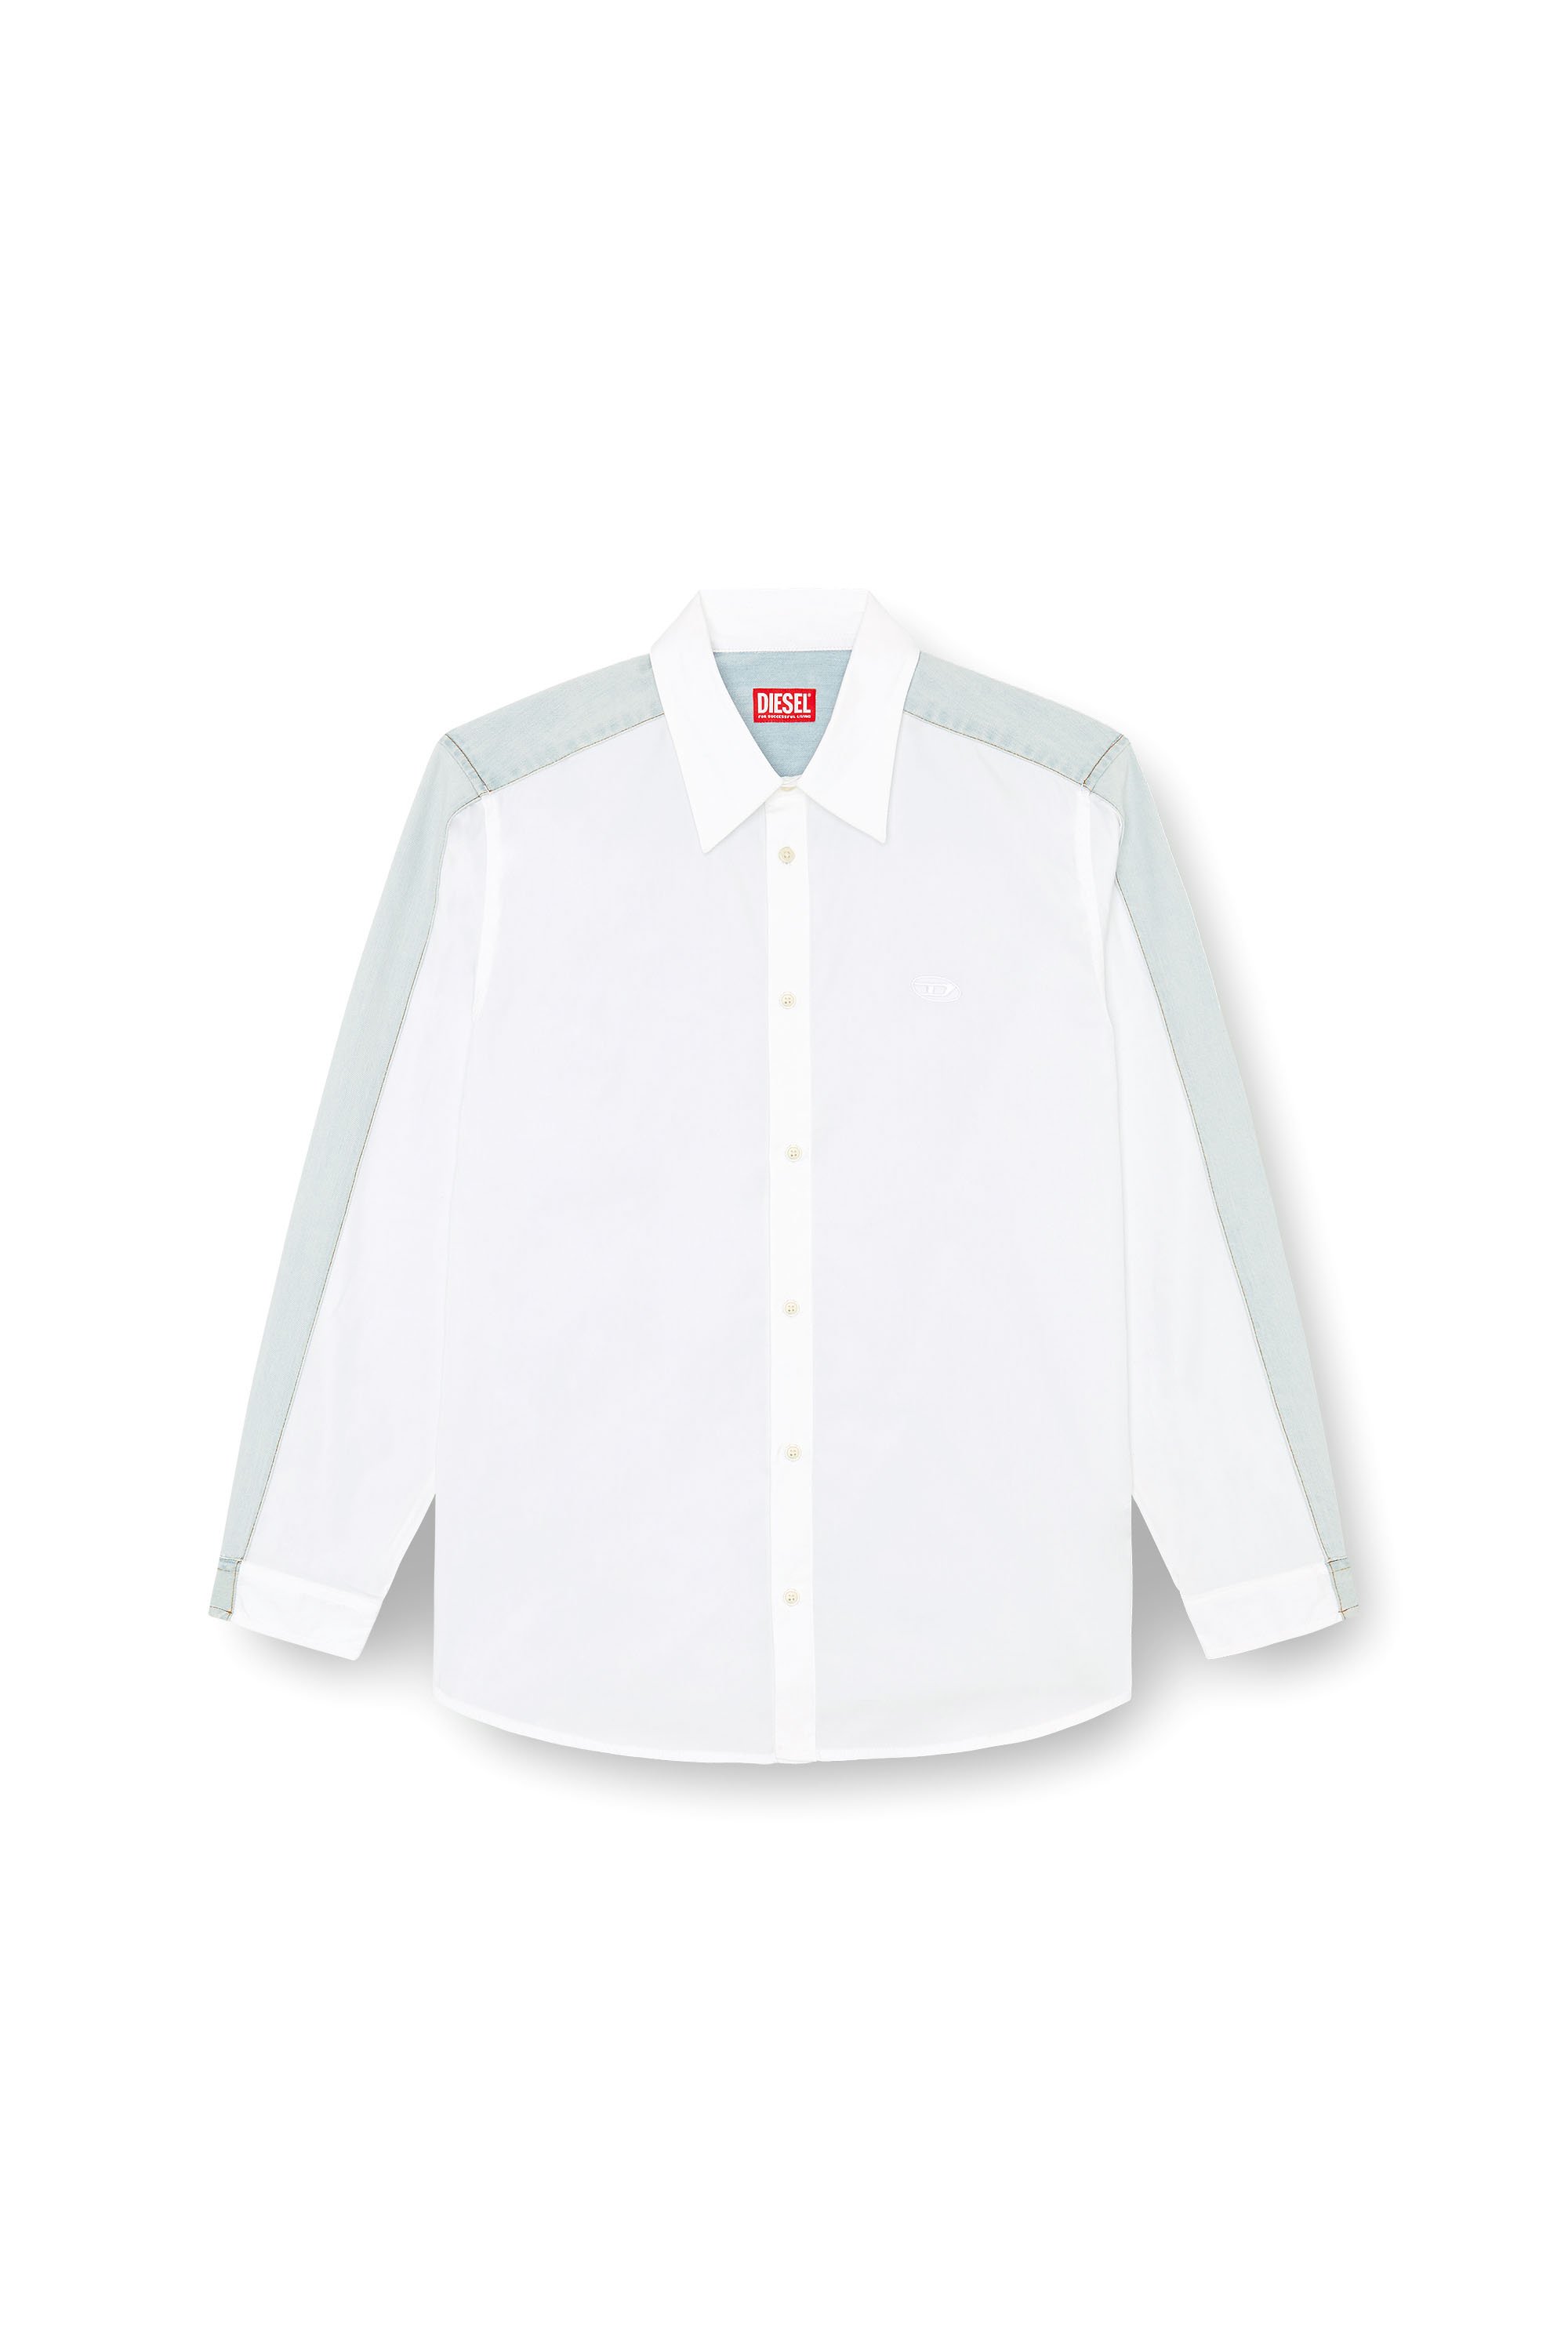 Diesel - S-SIMPLY-DNM, Man Shirt in cotton poplin and denim in Multicolor - Image 3